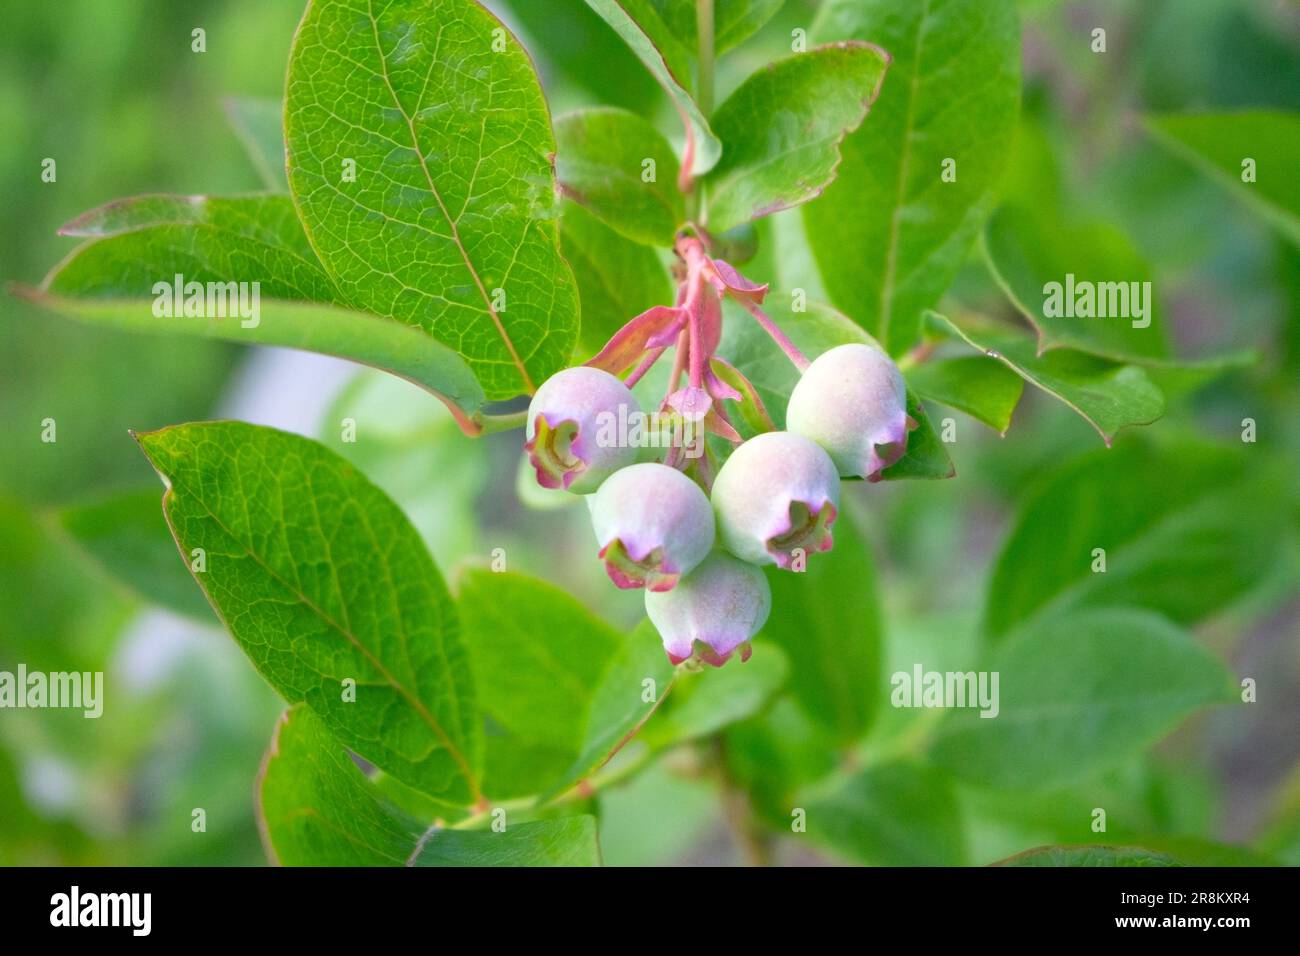 Branch of sweet blue berries on a plant in summer Stock Photo